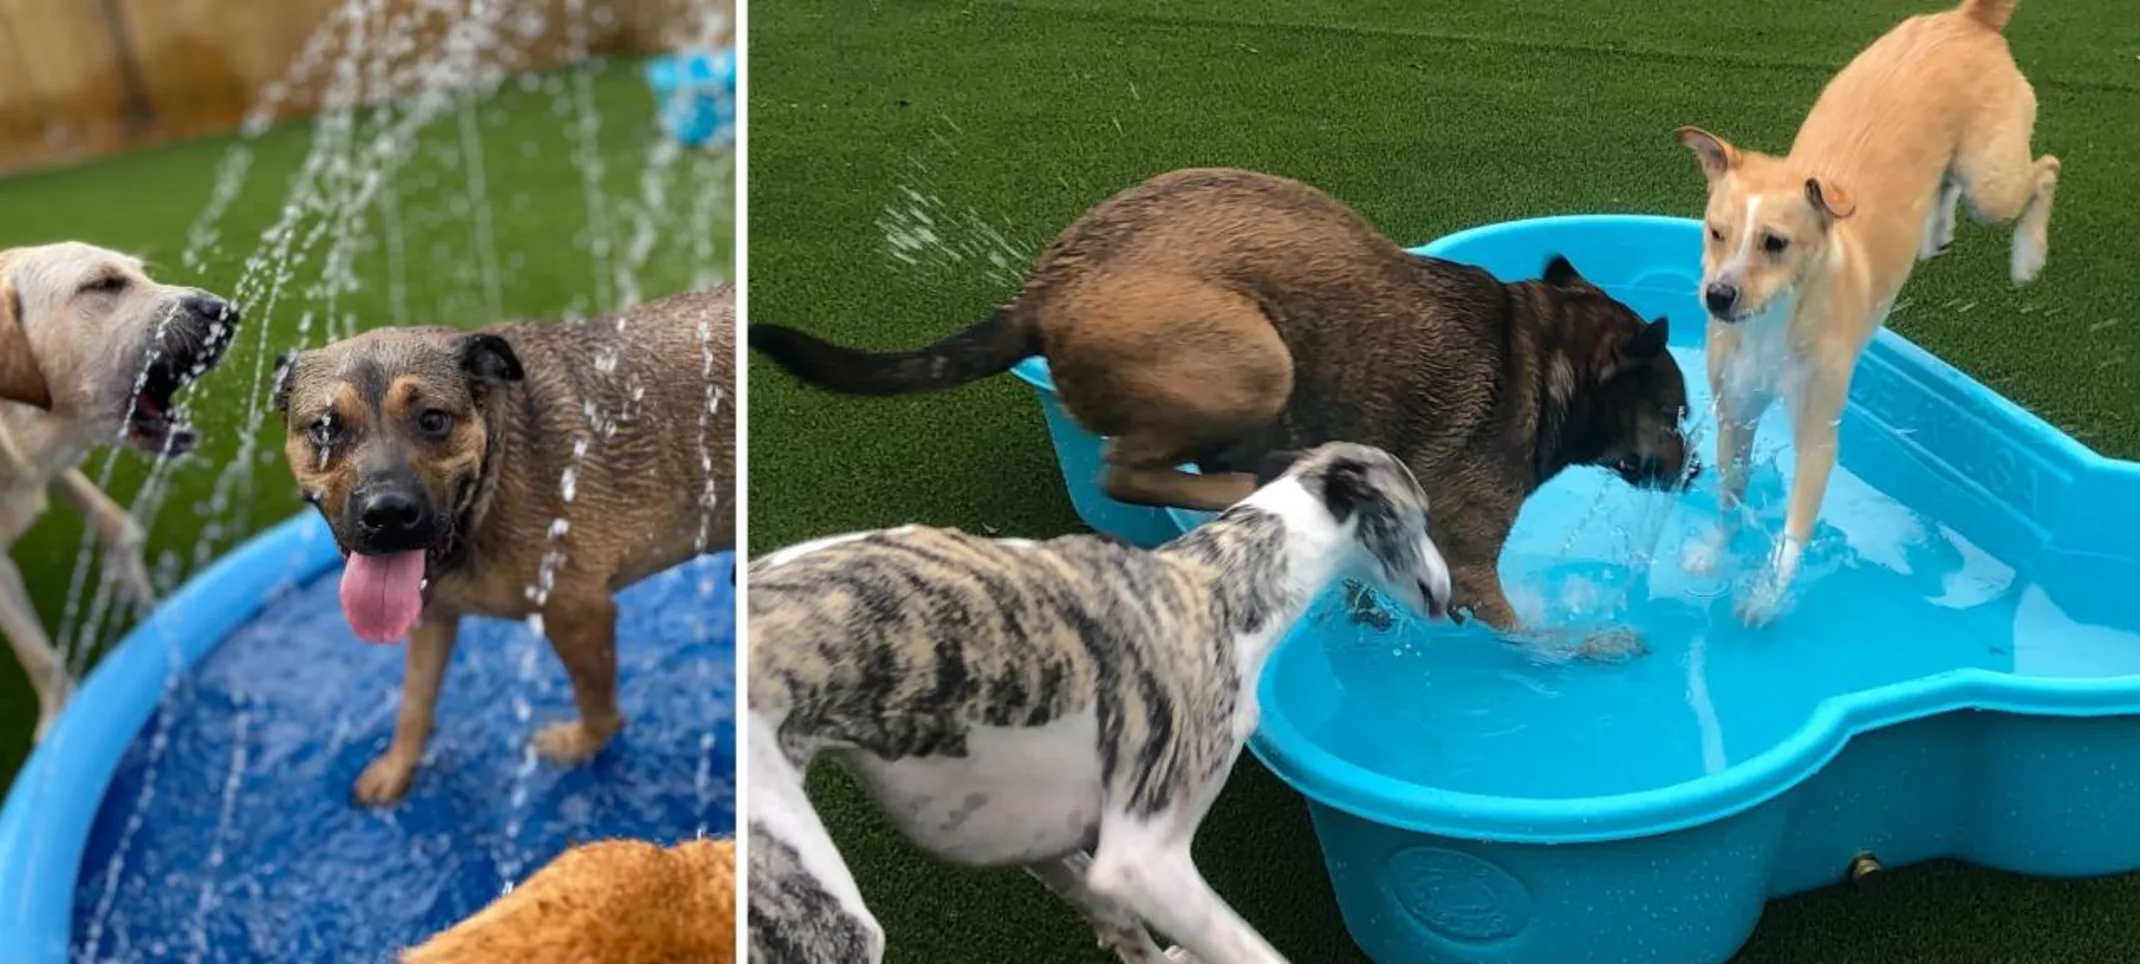 Dogs playing in a pool at The Playground.